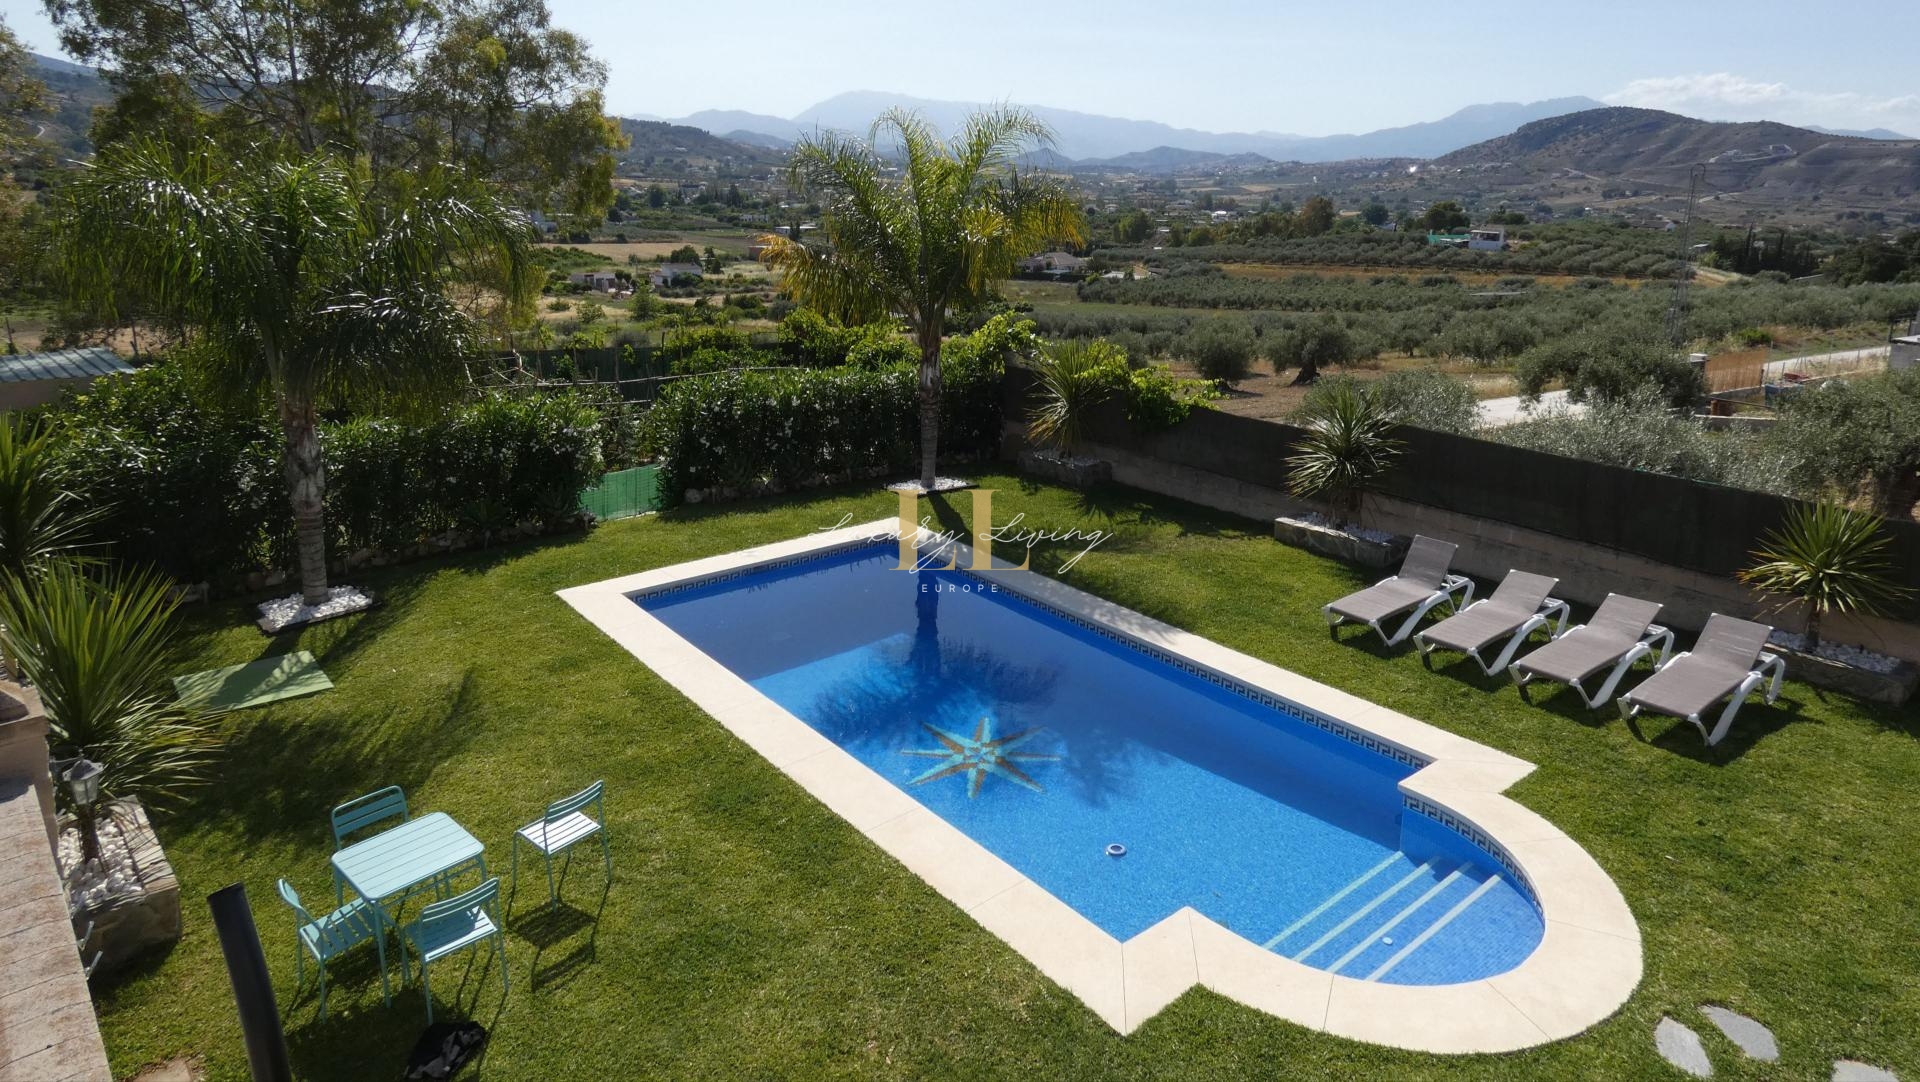 6 Bedroom Country House in Alhaurín el Grande Accommodation in Malaga